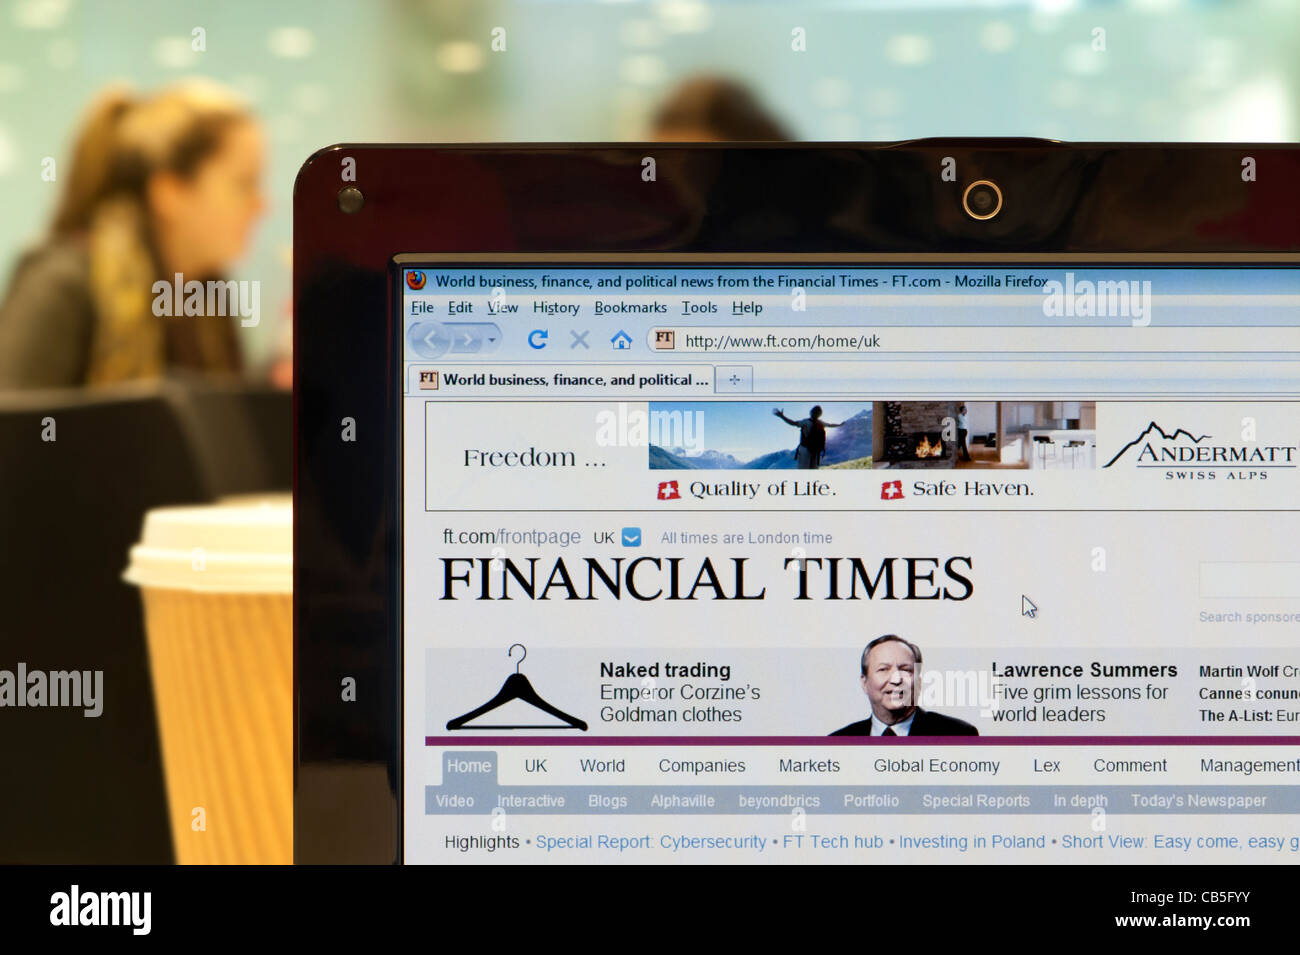 The Financial Times website shot in a coffee shop environment (Editorial use only: print, TV, e-book and editorial website). Stock Photo